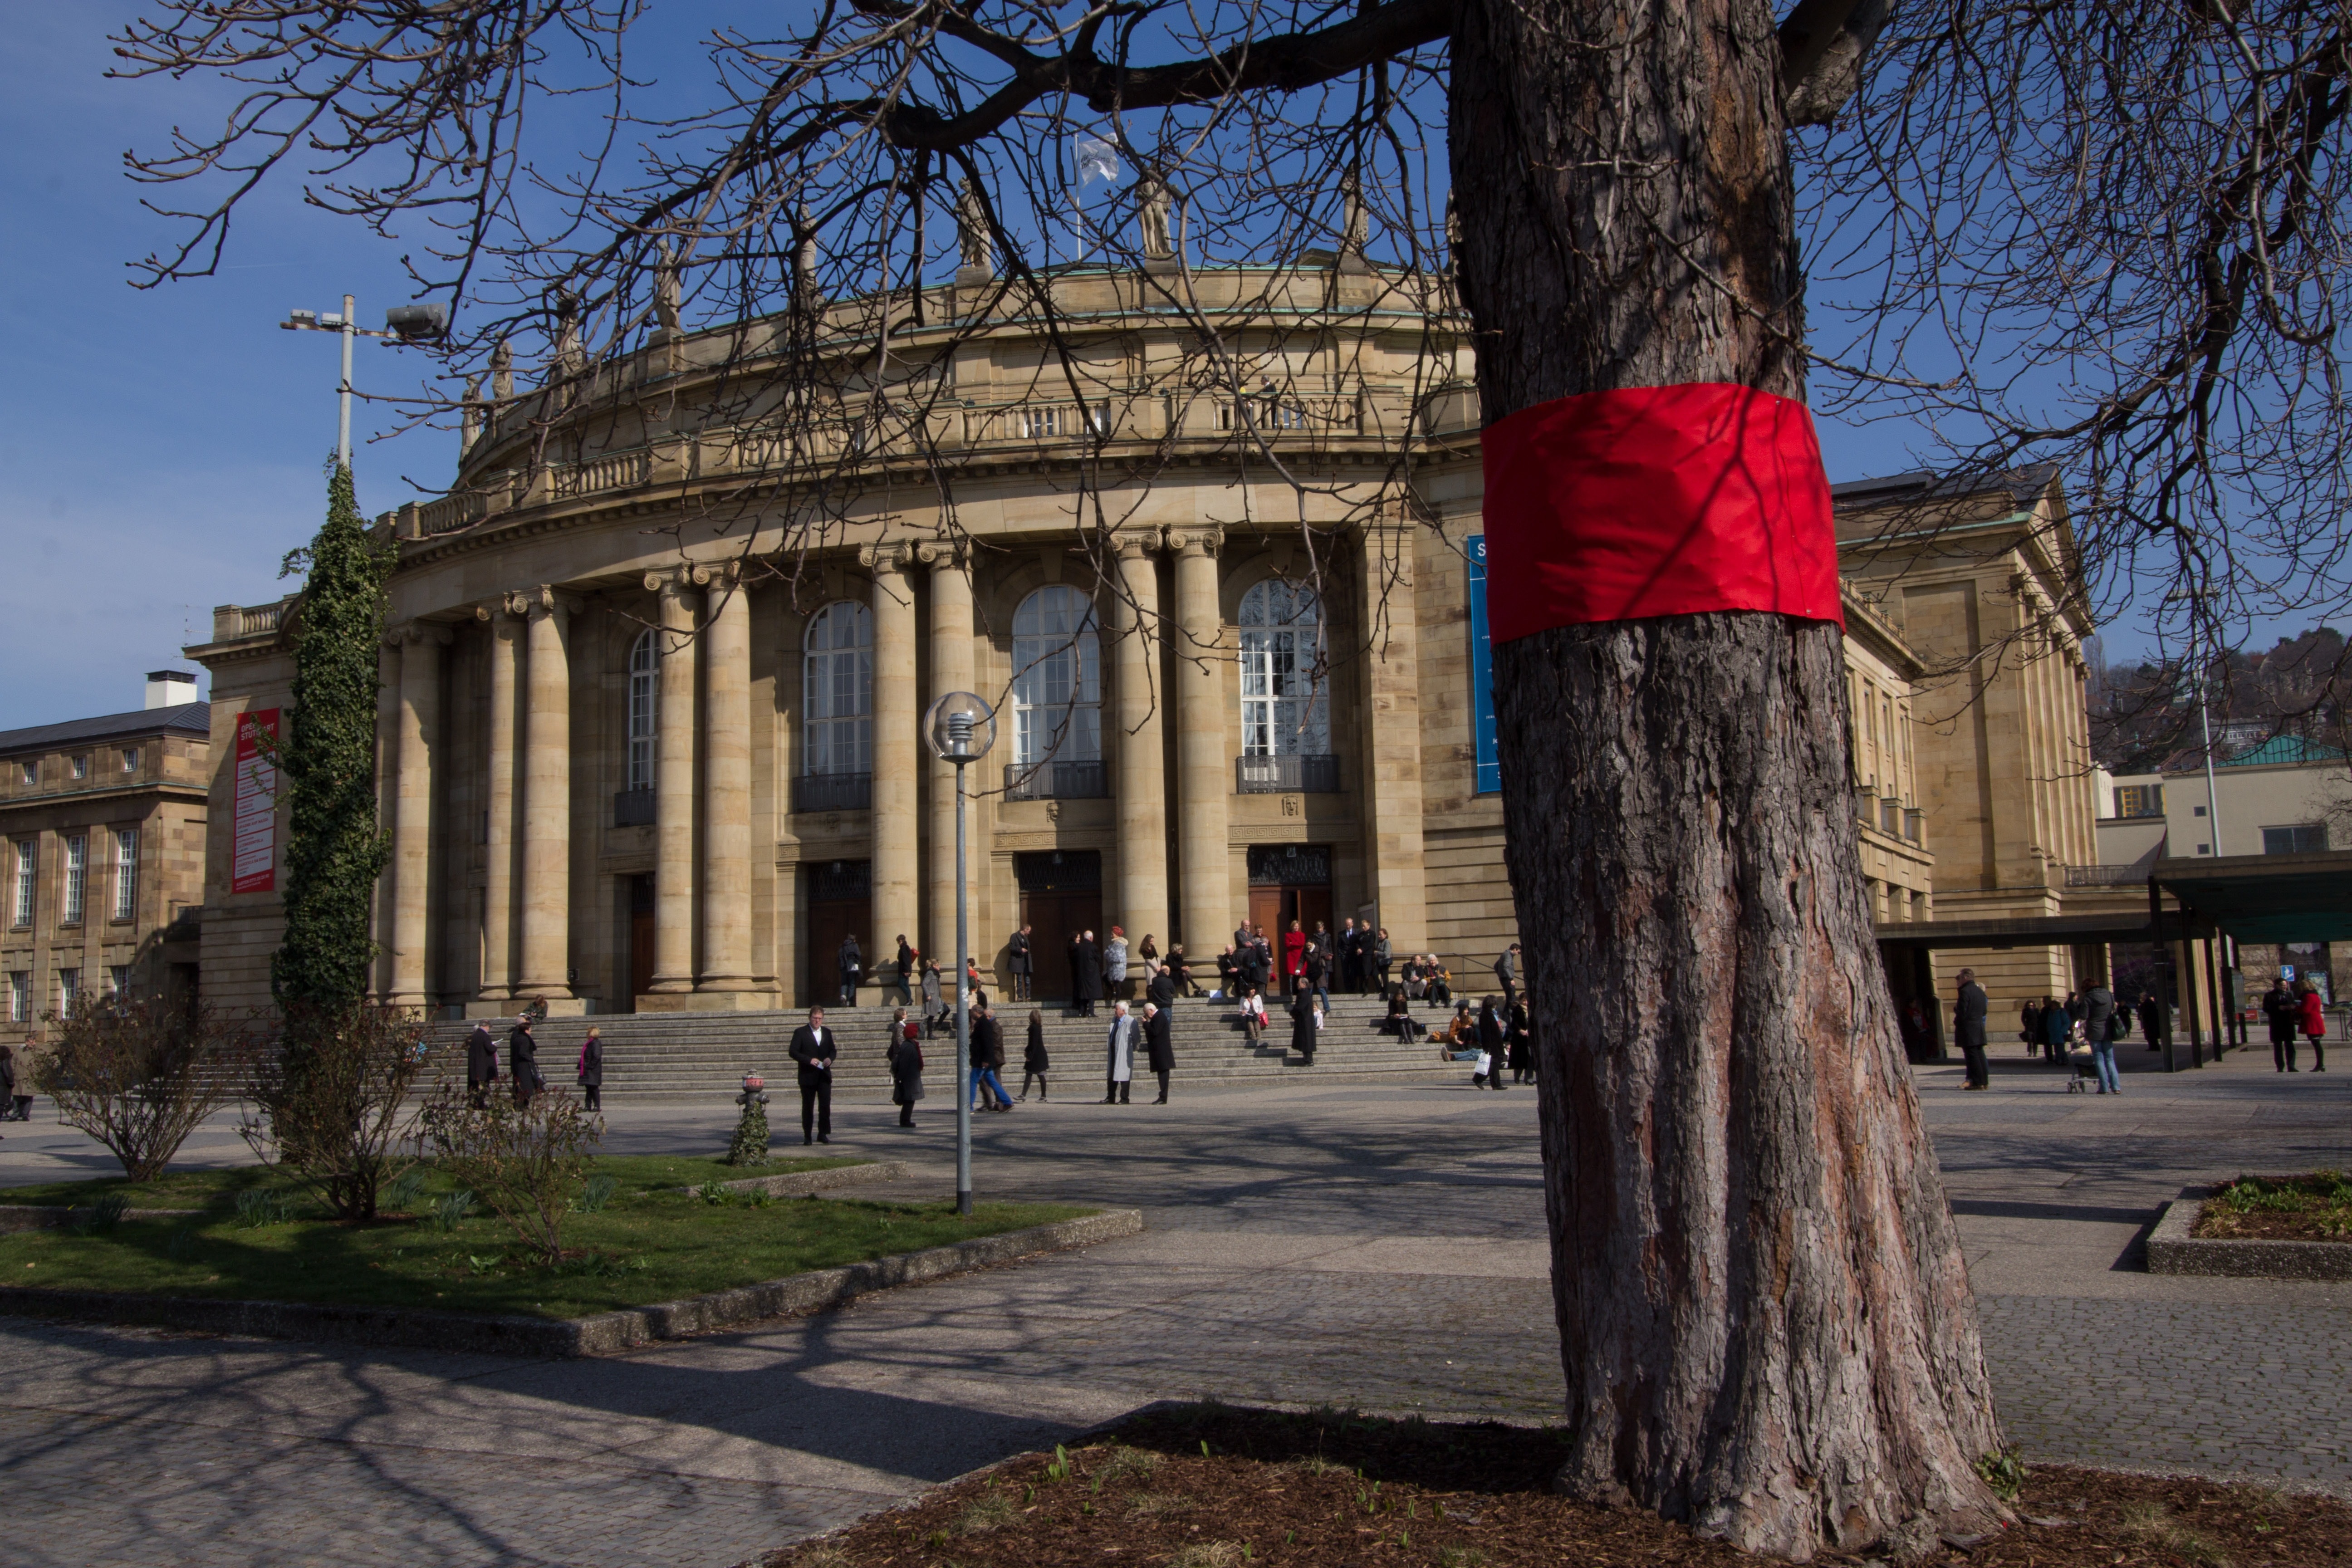 red flag on tree near brown building